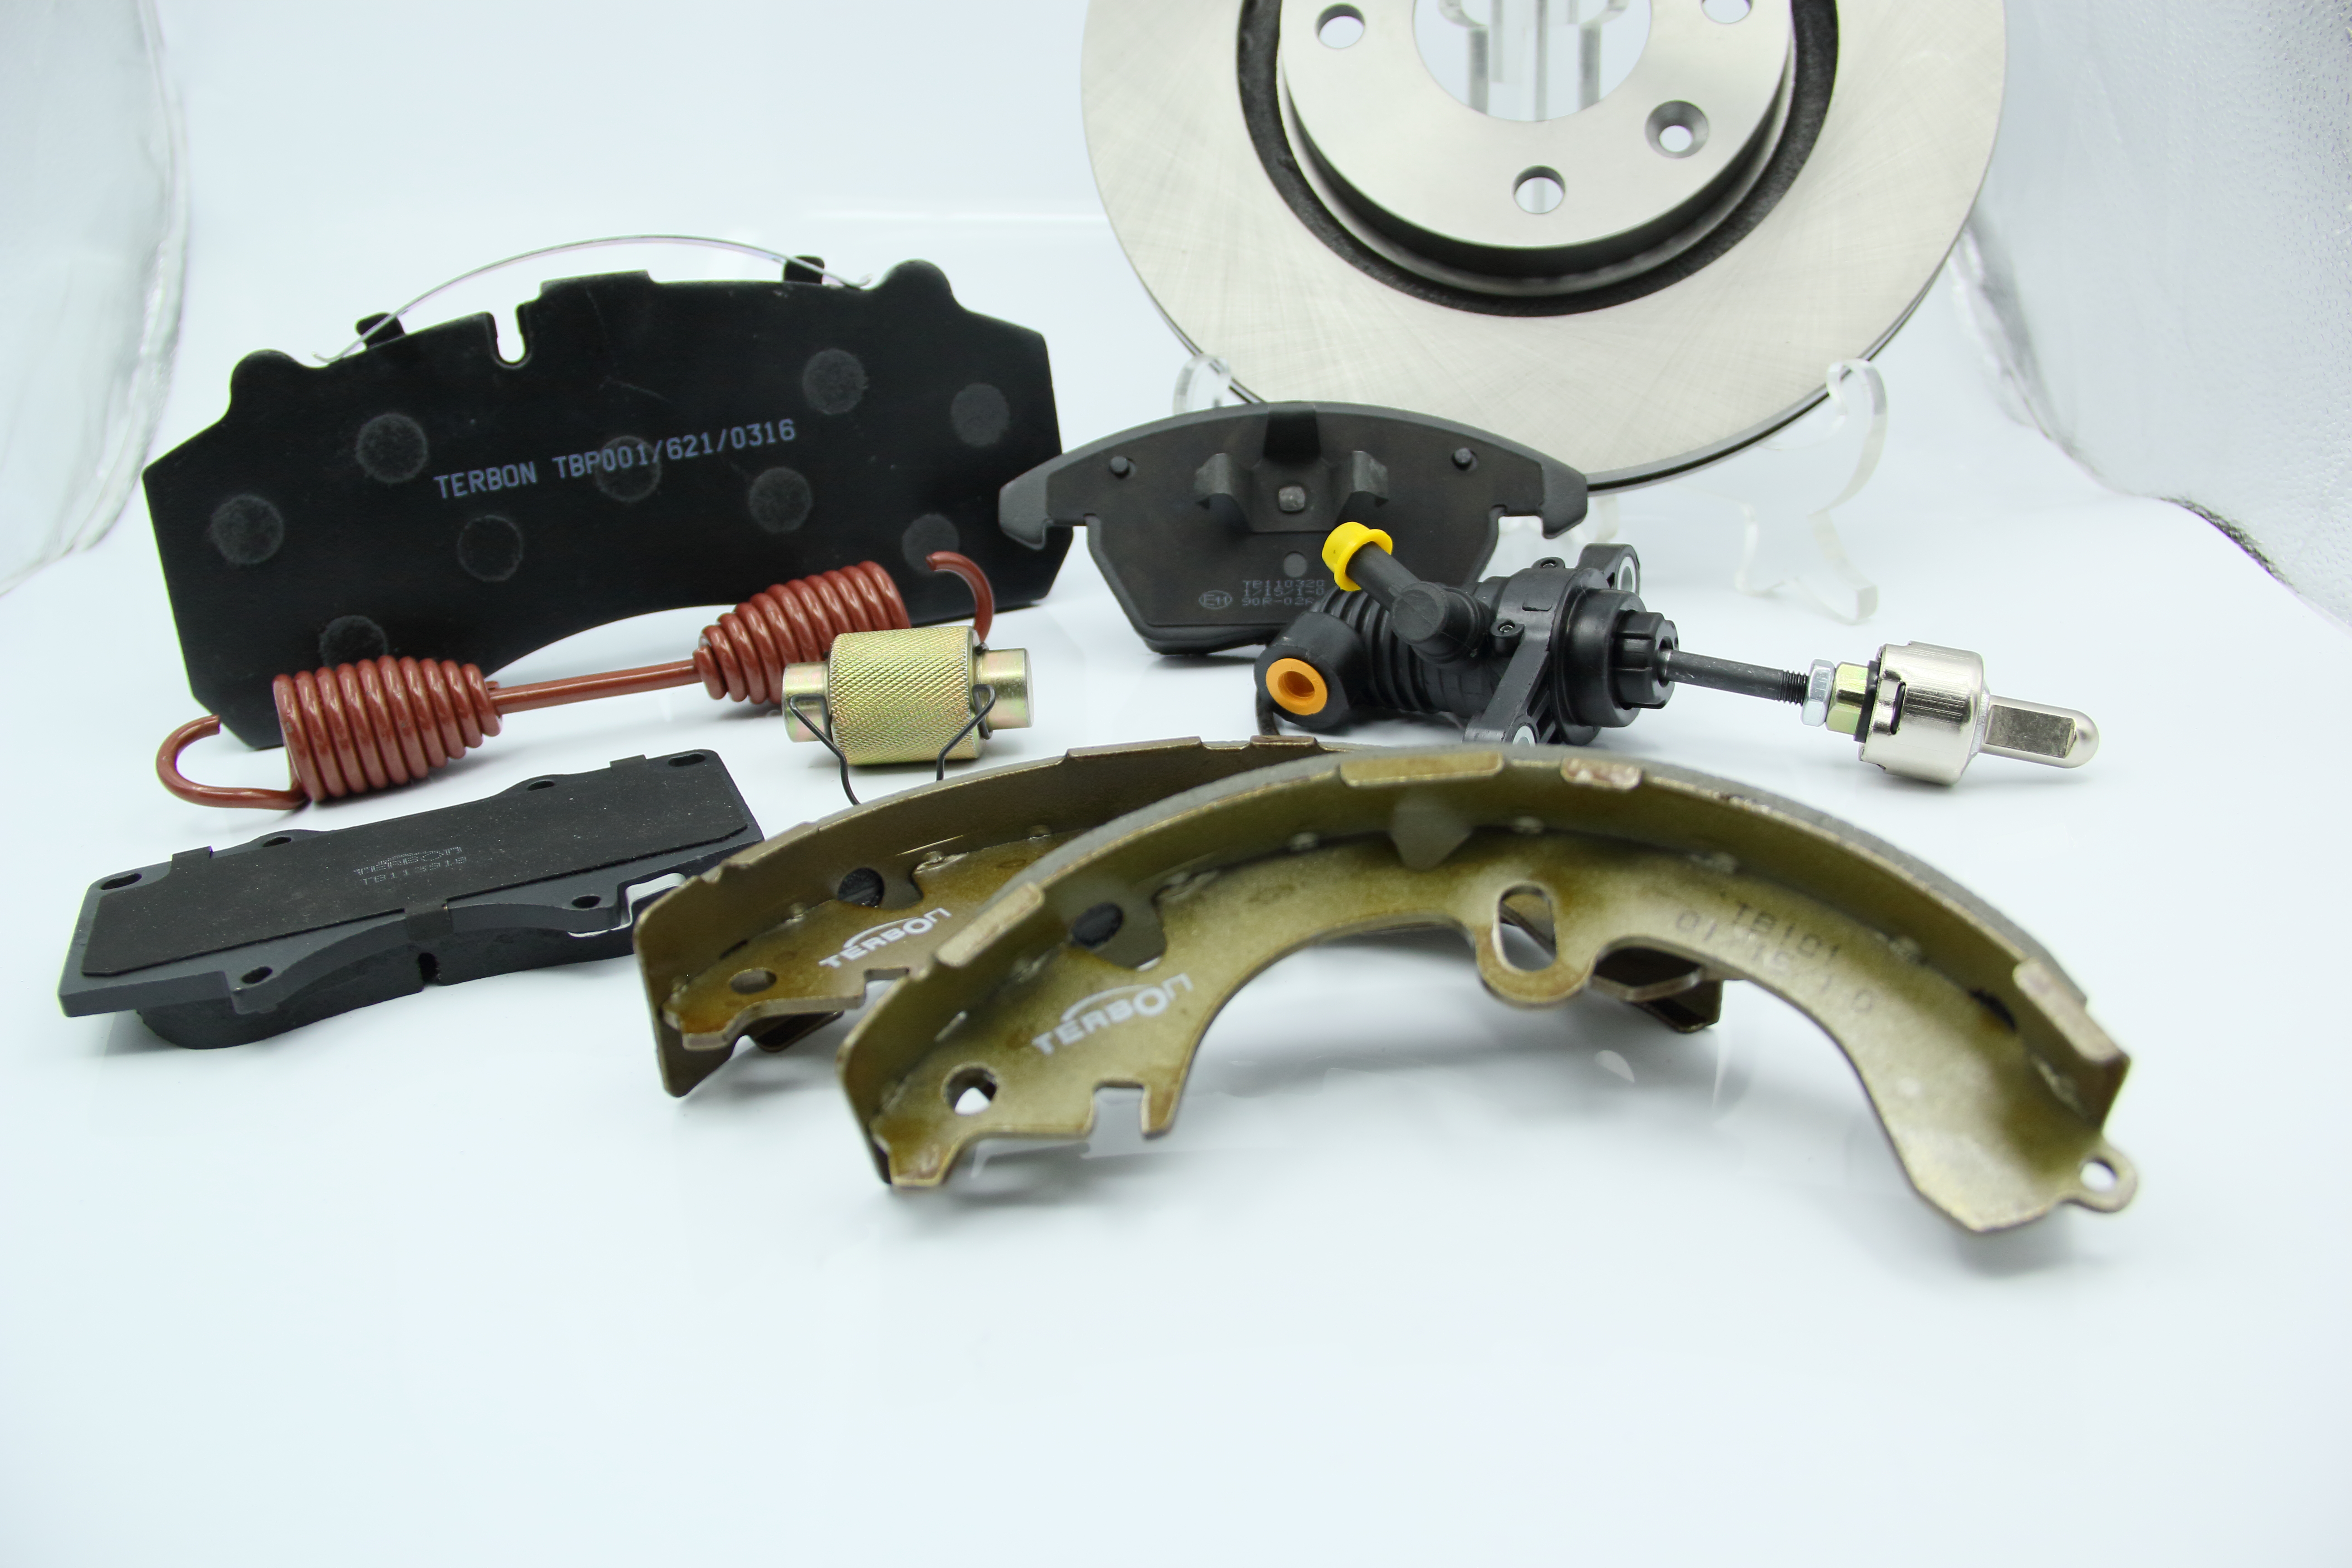 Brake Brake Series: Manufacturing Process and Quality Control for High Performance